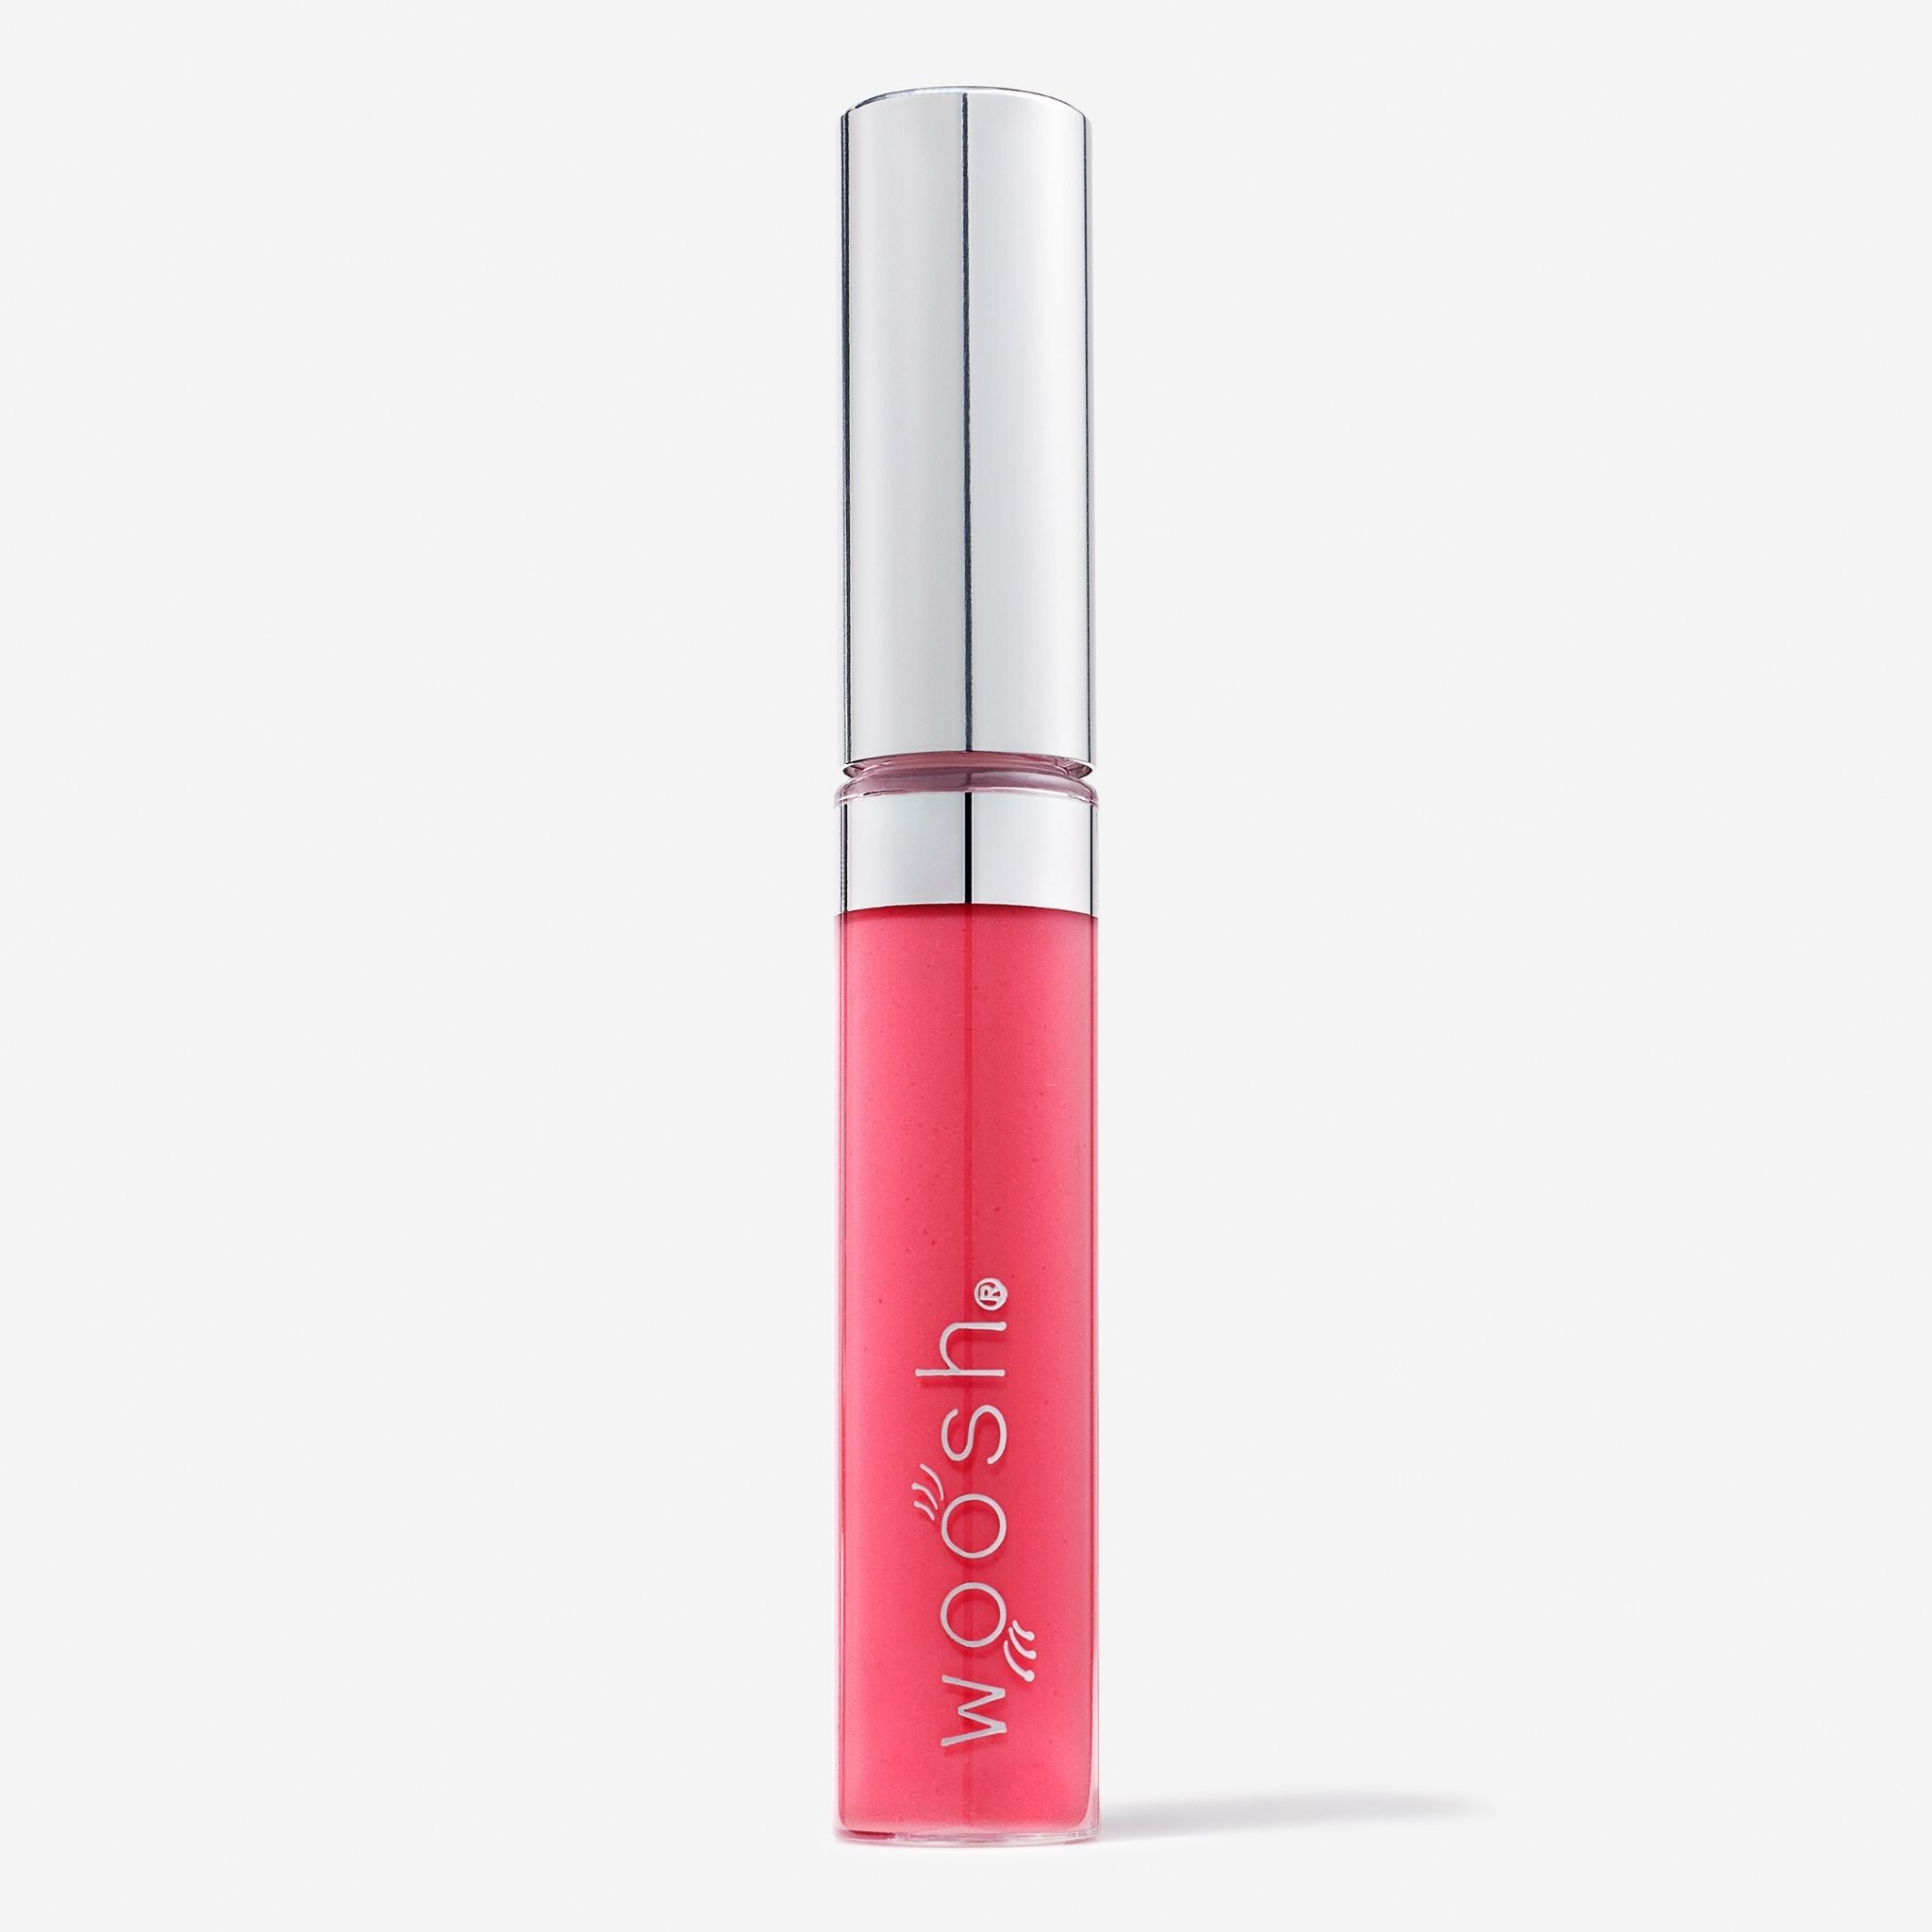 Previously known as pink natural, pop is now infused with shea butter and hyaluronic acid. The perfect pink pop of color shade. 